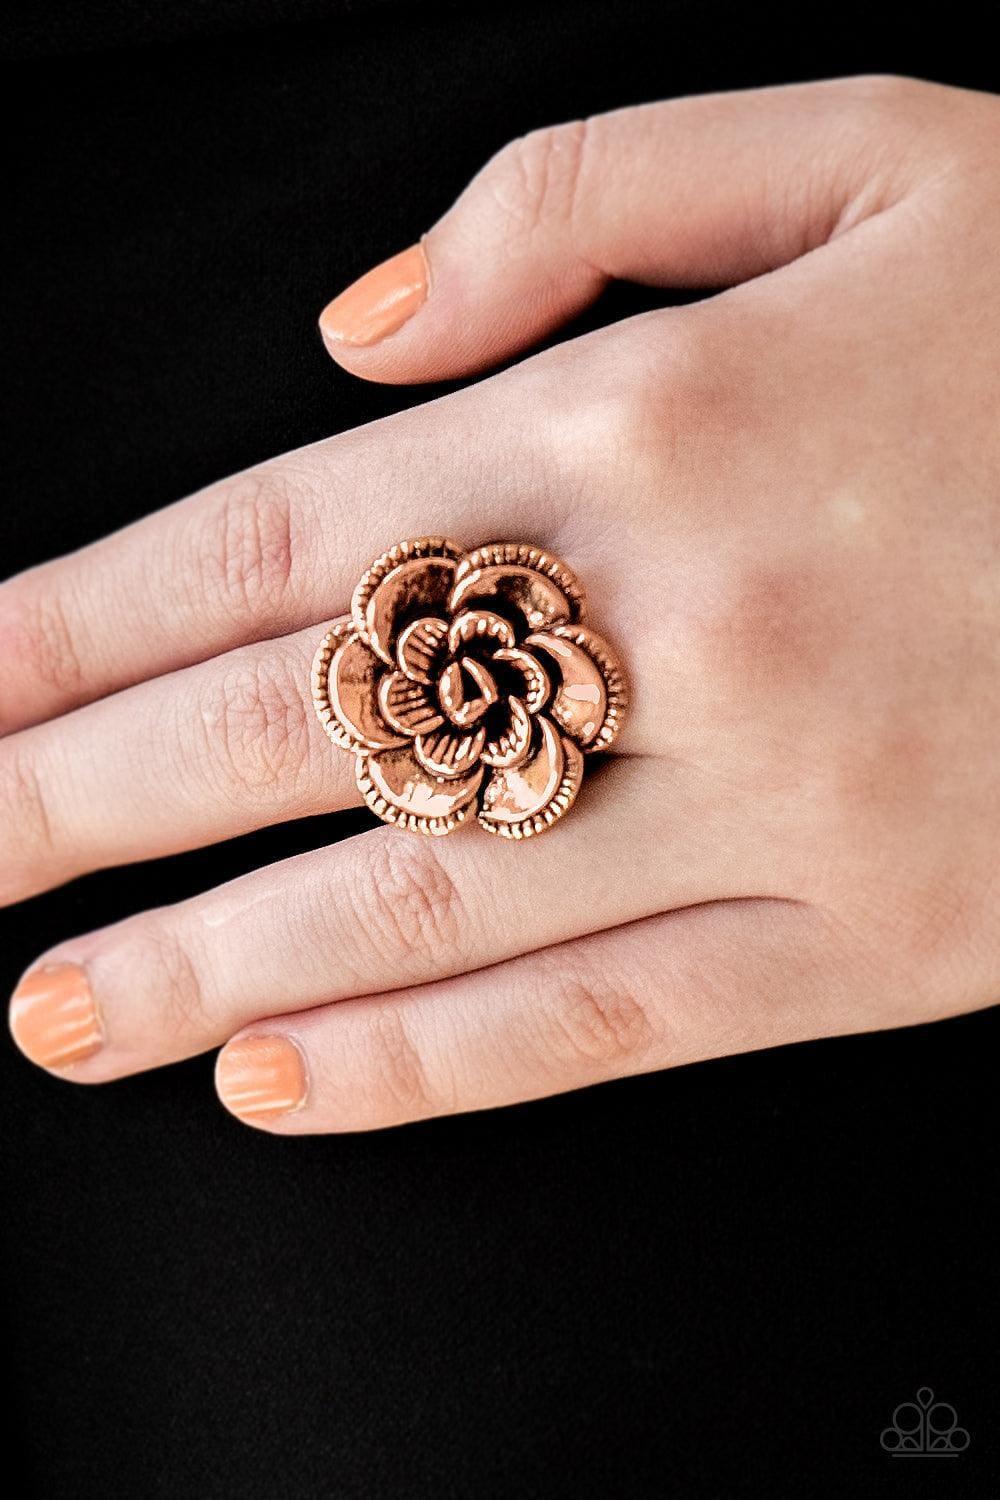 Paparazzi Accessories - Flowerbed And Breakfast - Copper Ring - Bling by JessieK